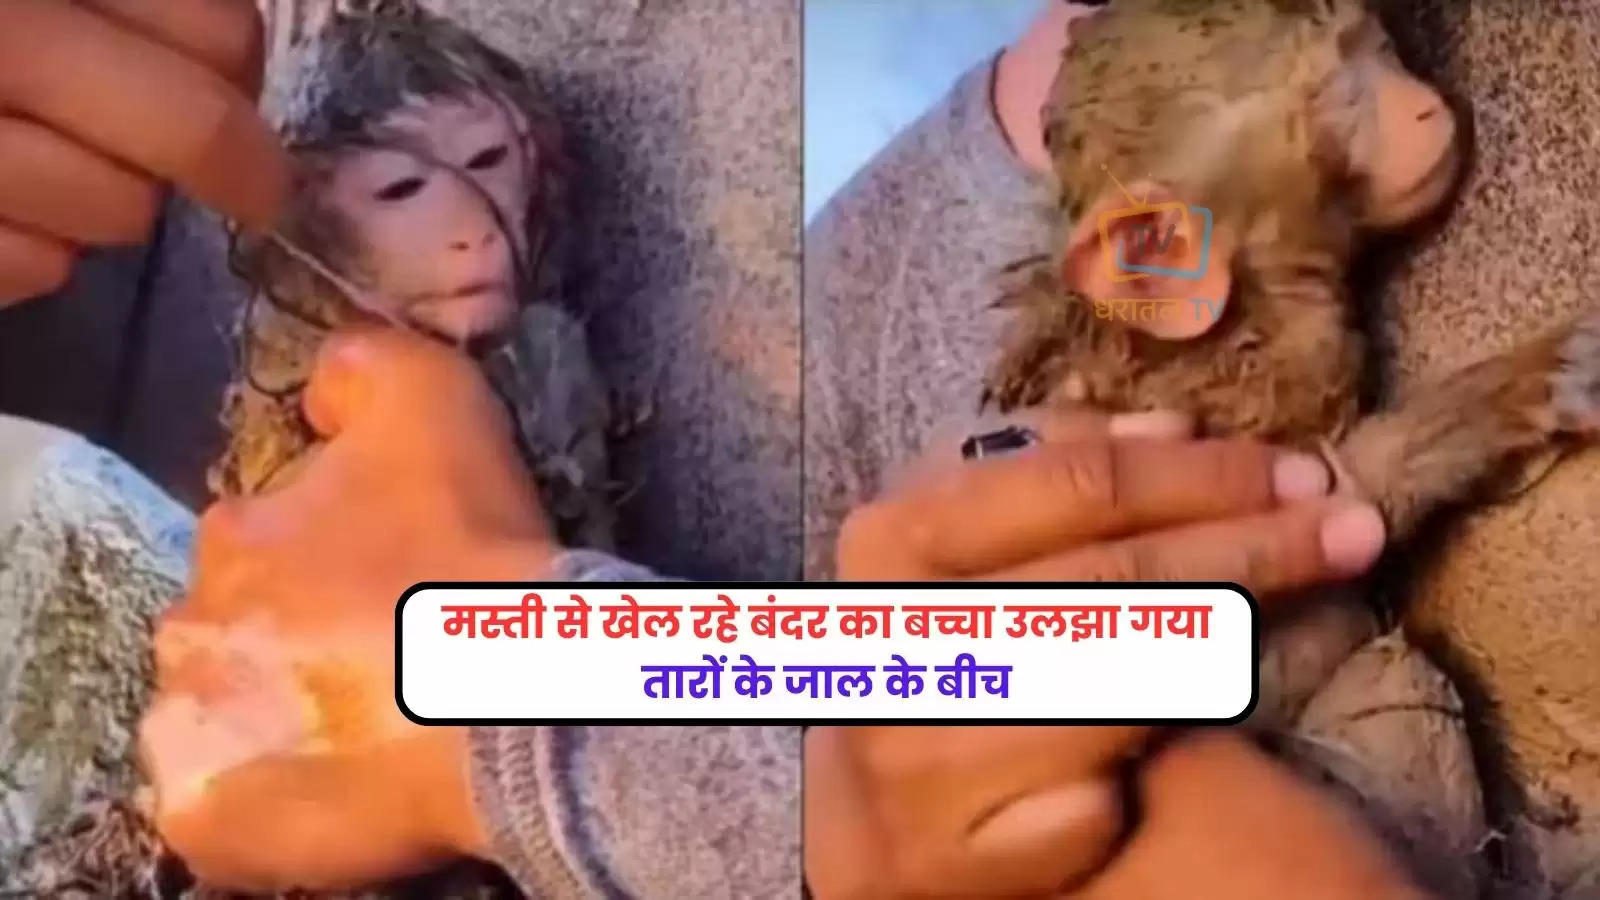 man-freeing-baby-monkey-entangled-in-wires-and-string-adorable-video-goes-viral-on-social-media